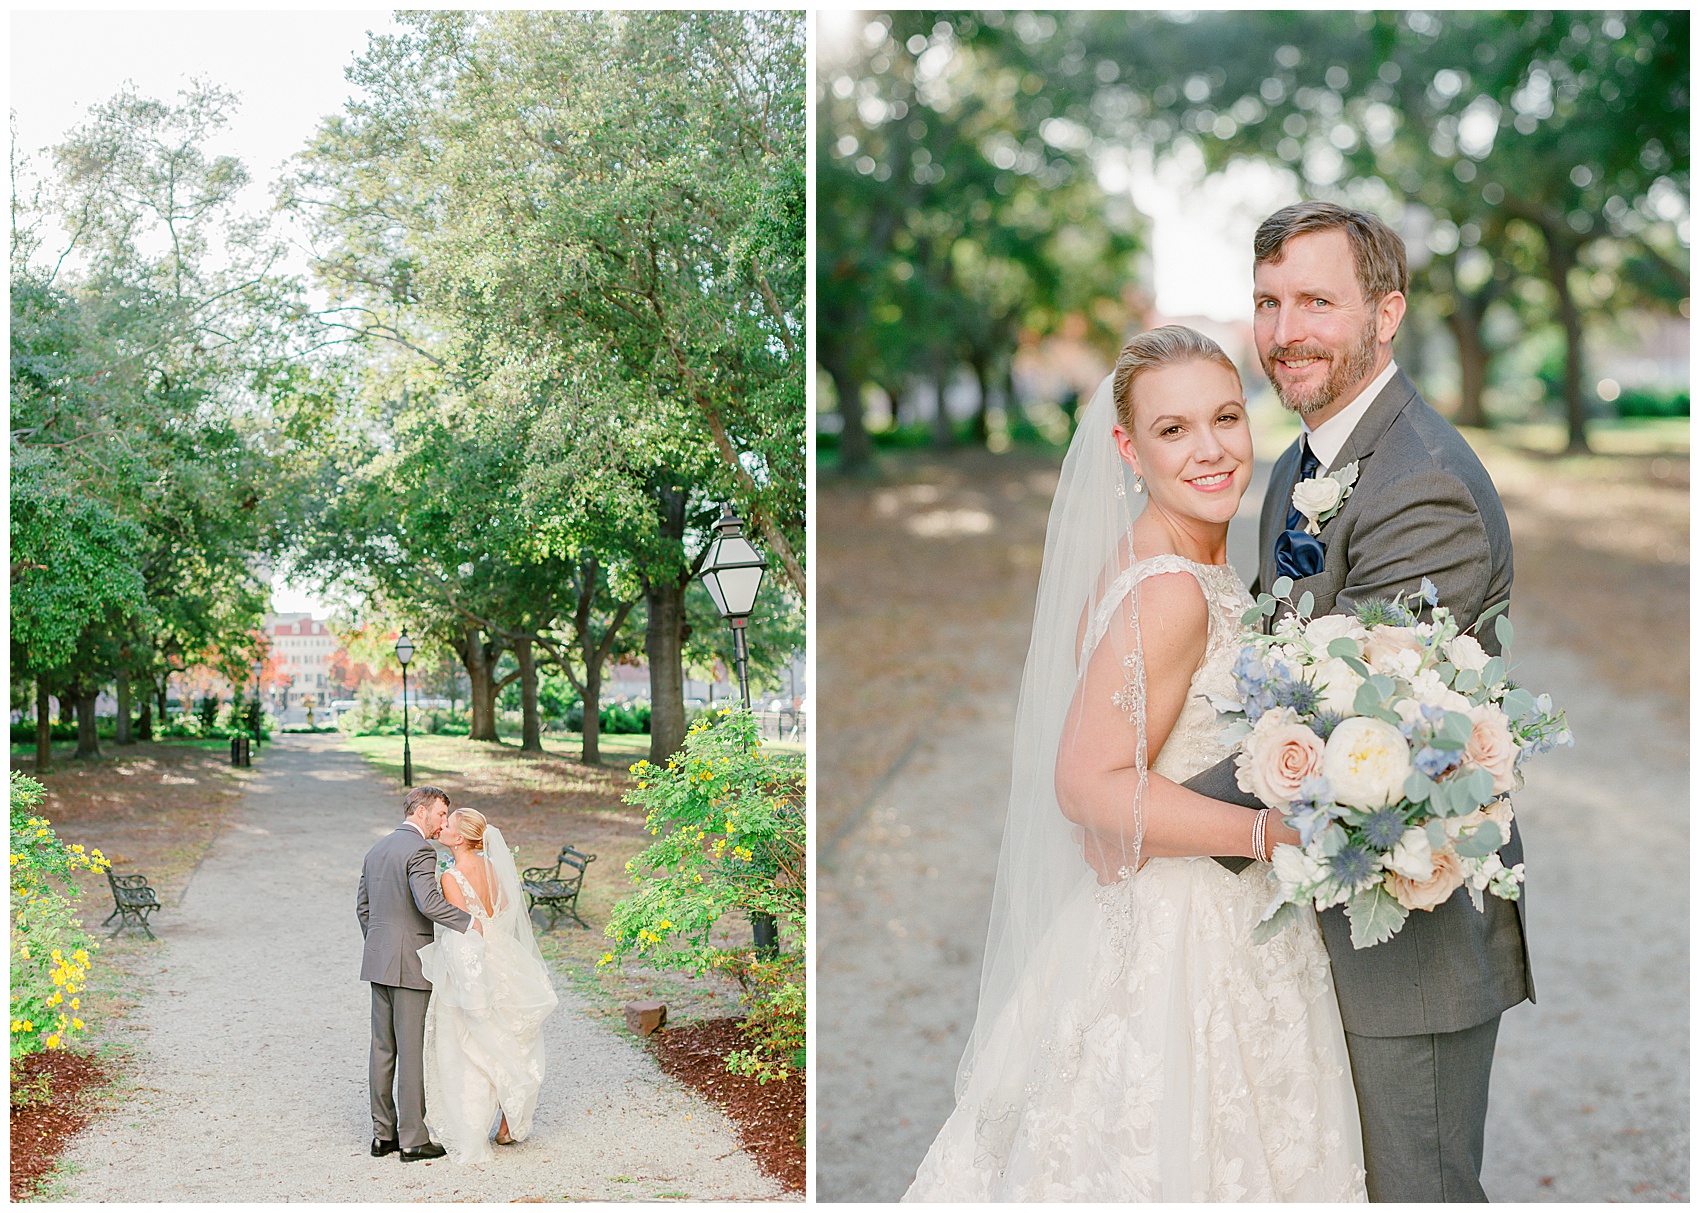 A Charleston wedding | bride and groom first look | best questions to ask your wedding photographer